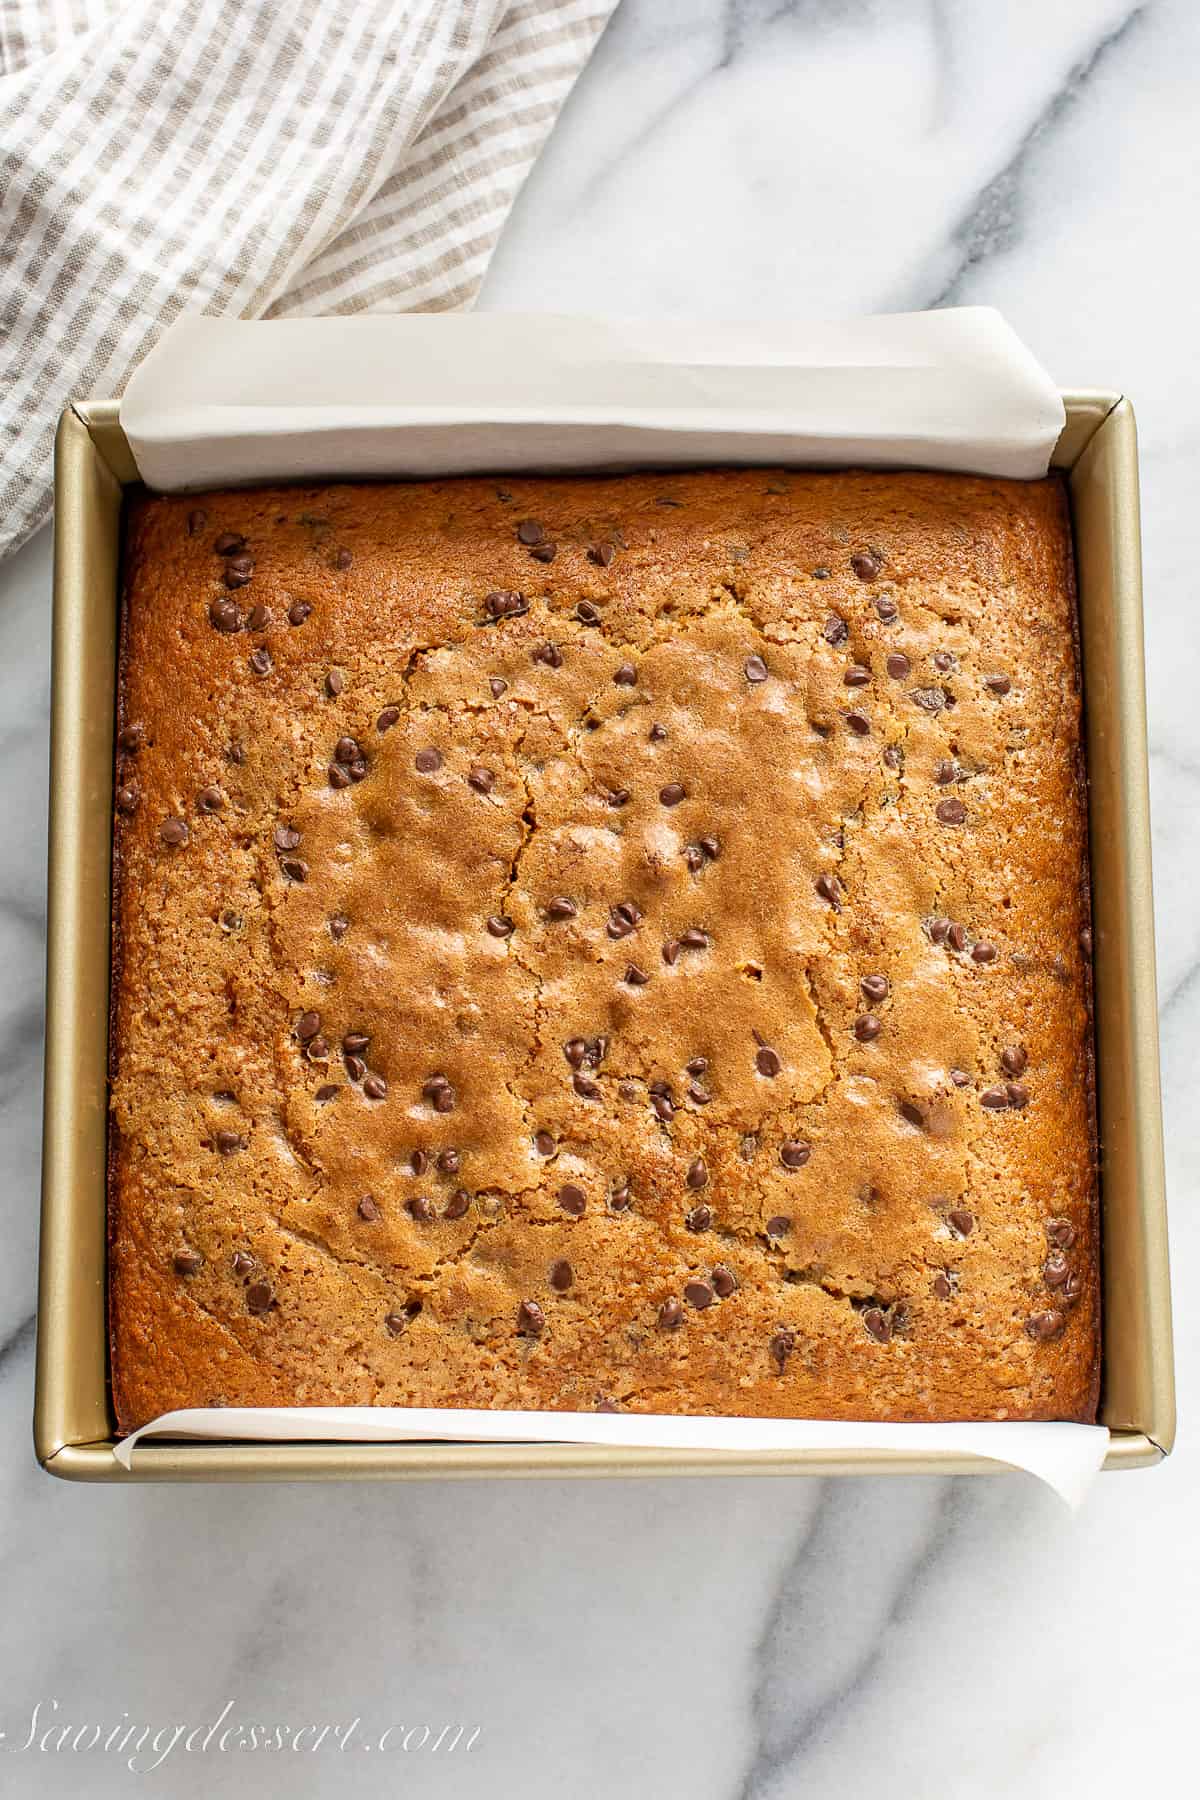 a golden brown baked banana chocolate chip cake in a pan